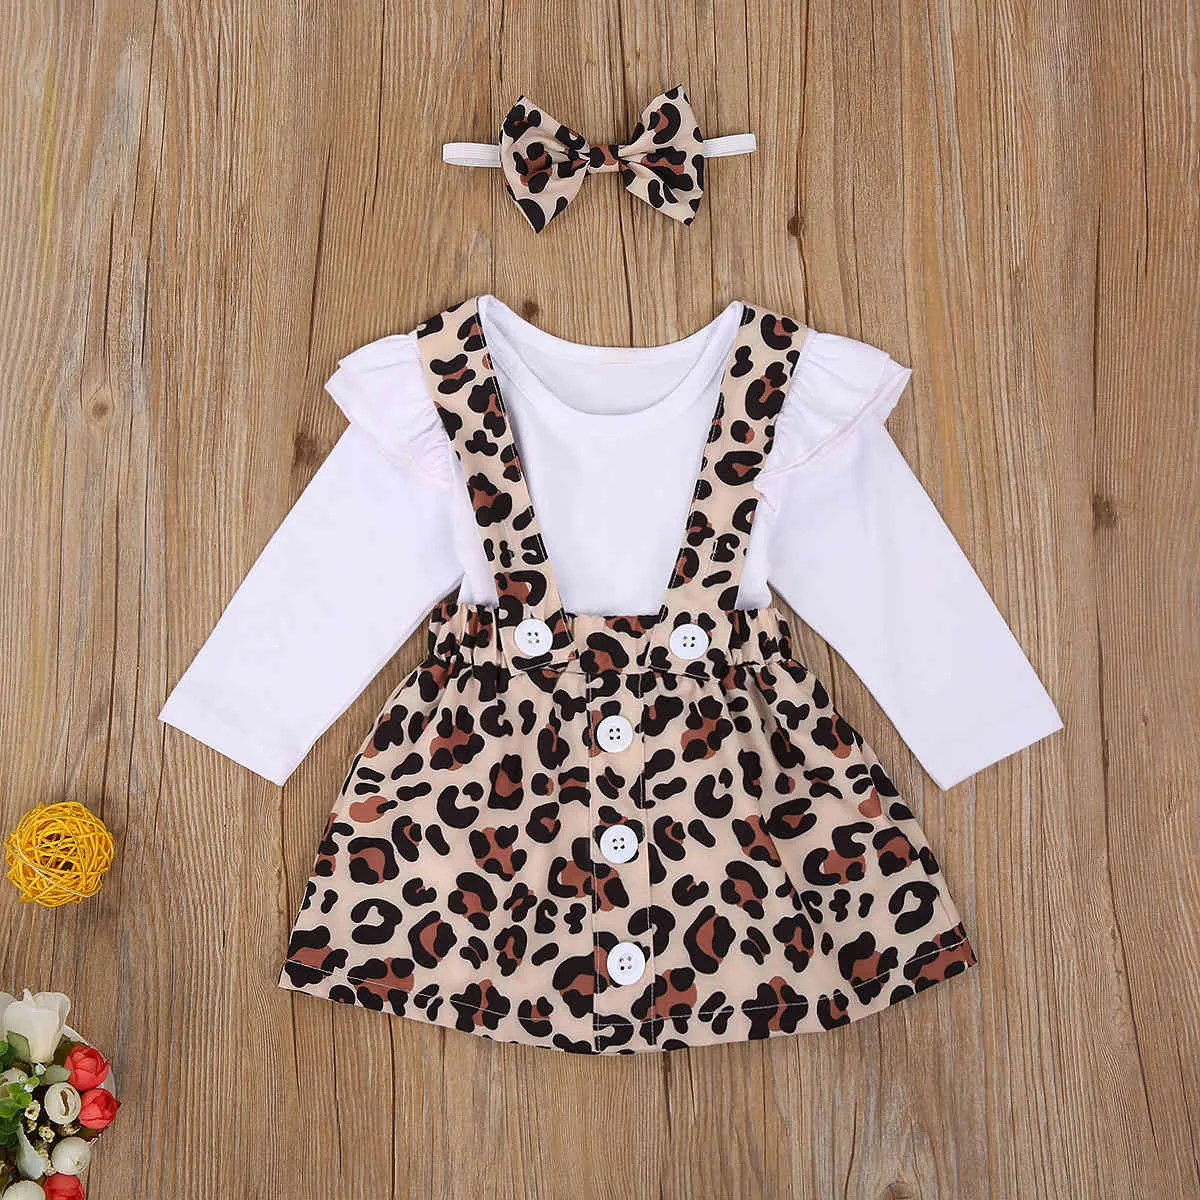 0-24M Autumn Spring born Infant Baby Girls Clothes Set White Long Sleeve Top Skirts Overalls Outfits 210515